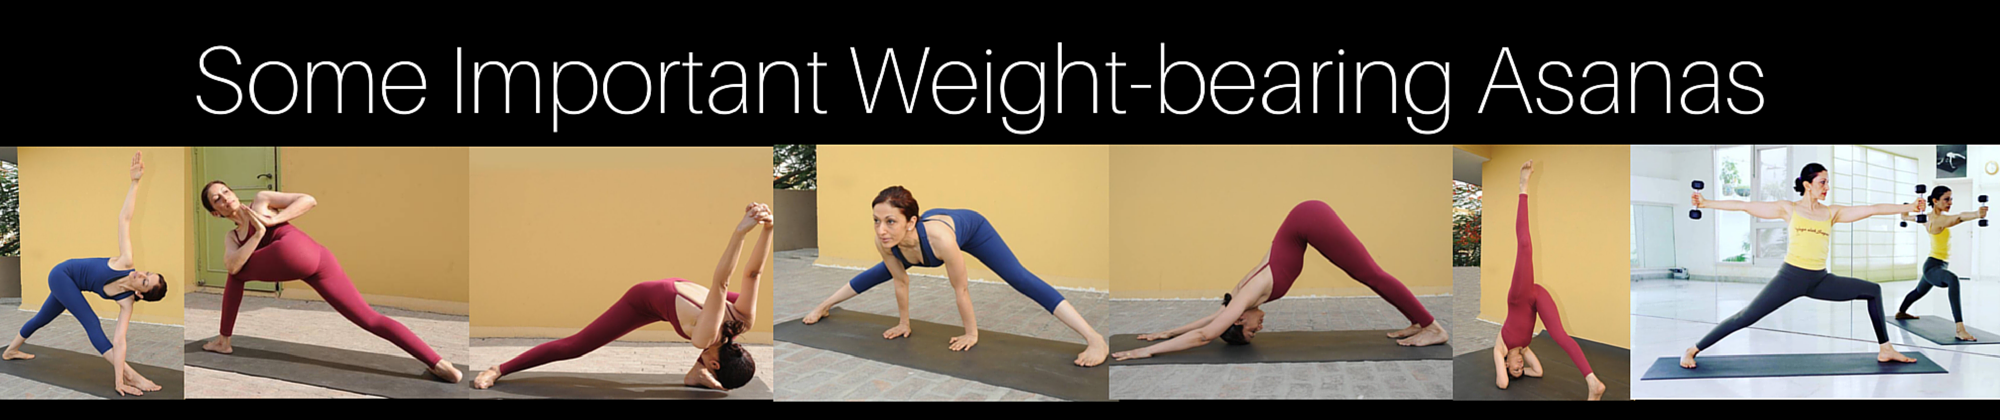 some important weight bearing asanas